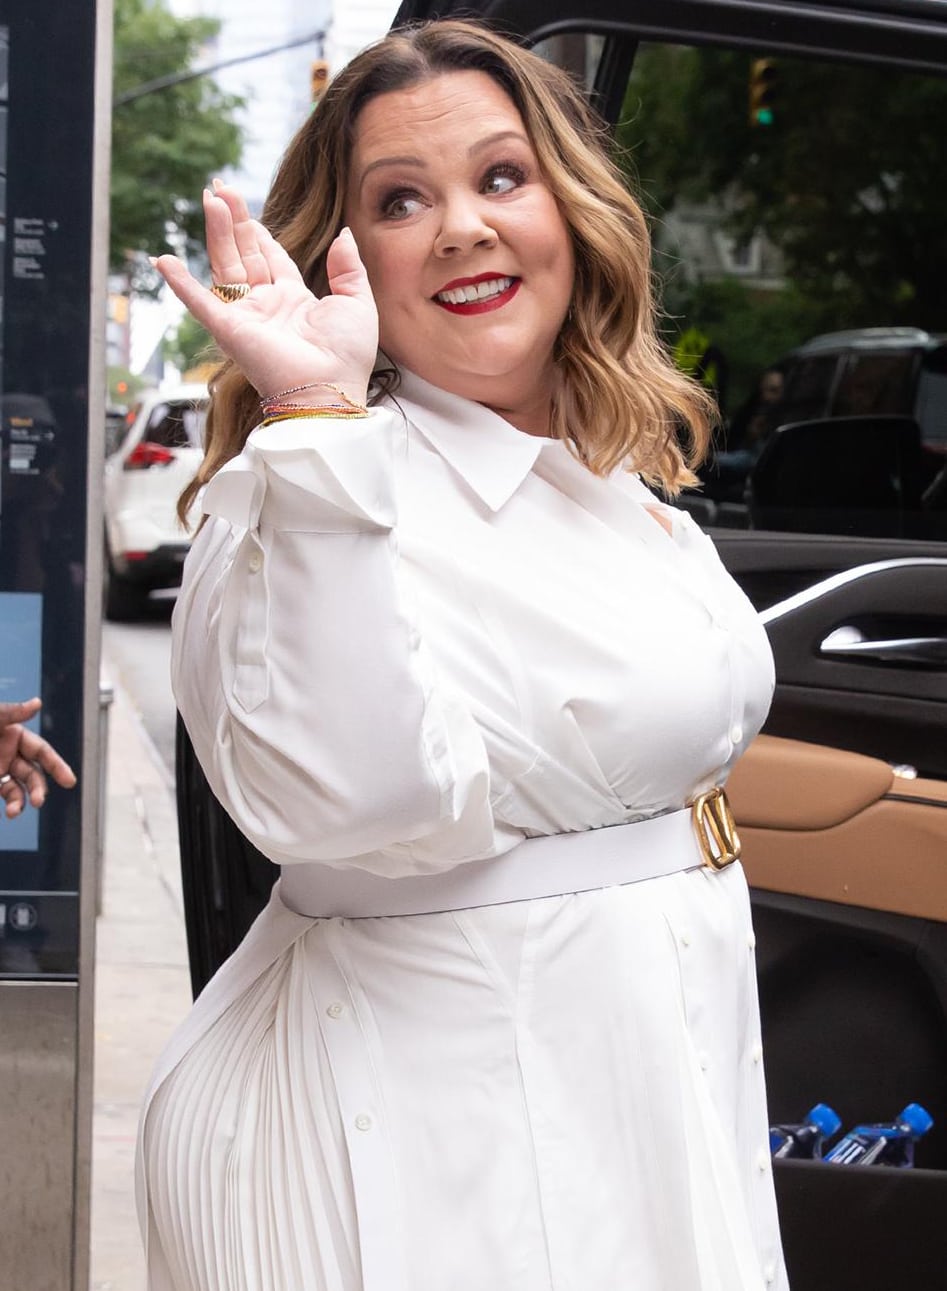 Melissa McCarthy styles her tresses in loose waves and wears a pop of red lip color